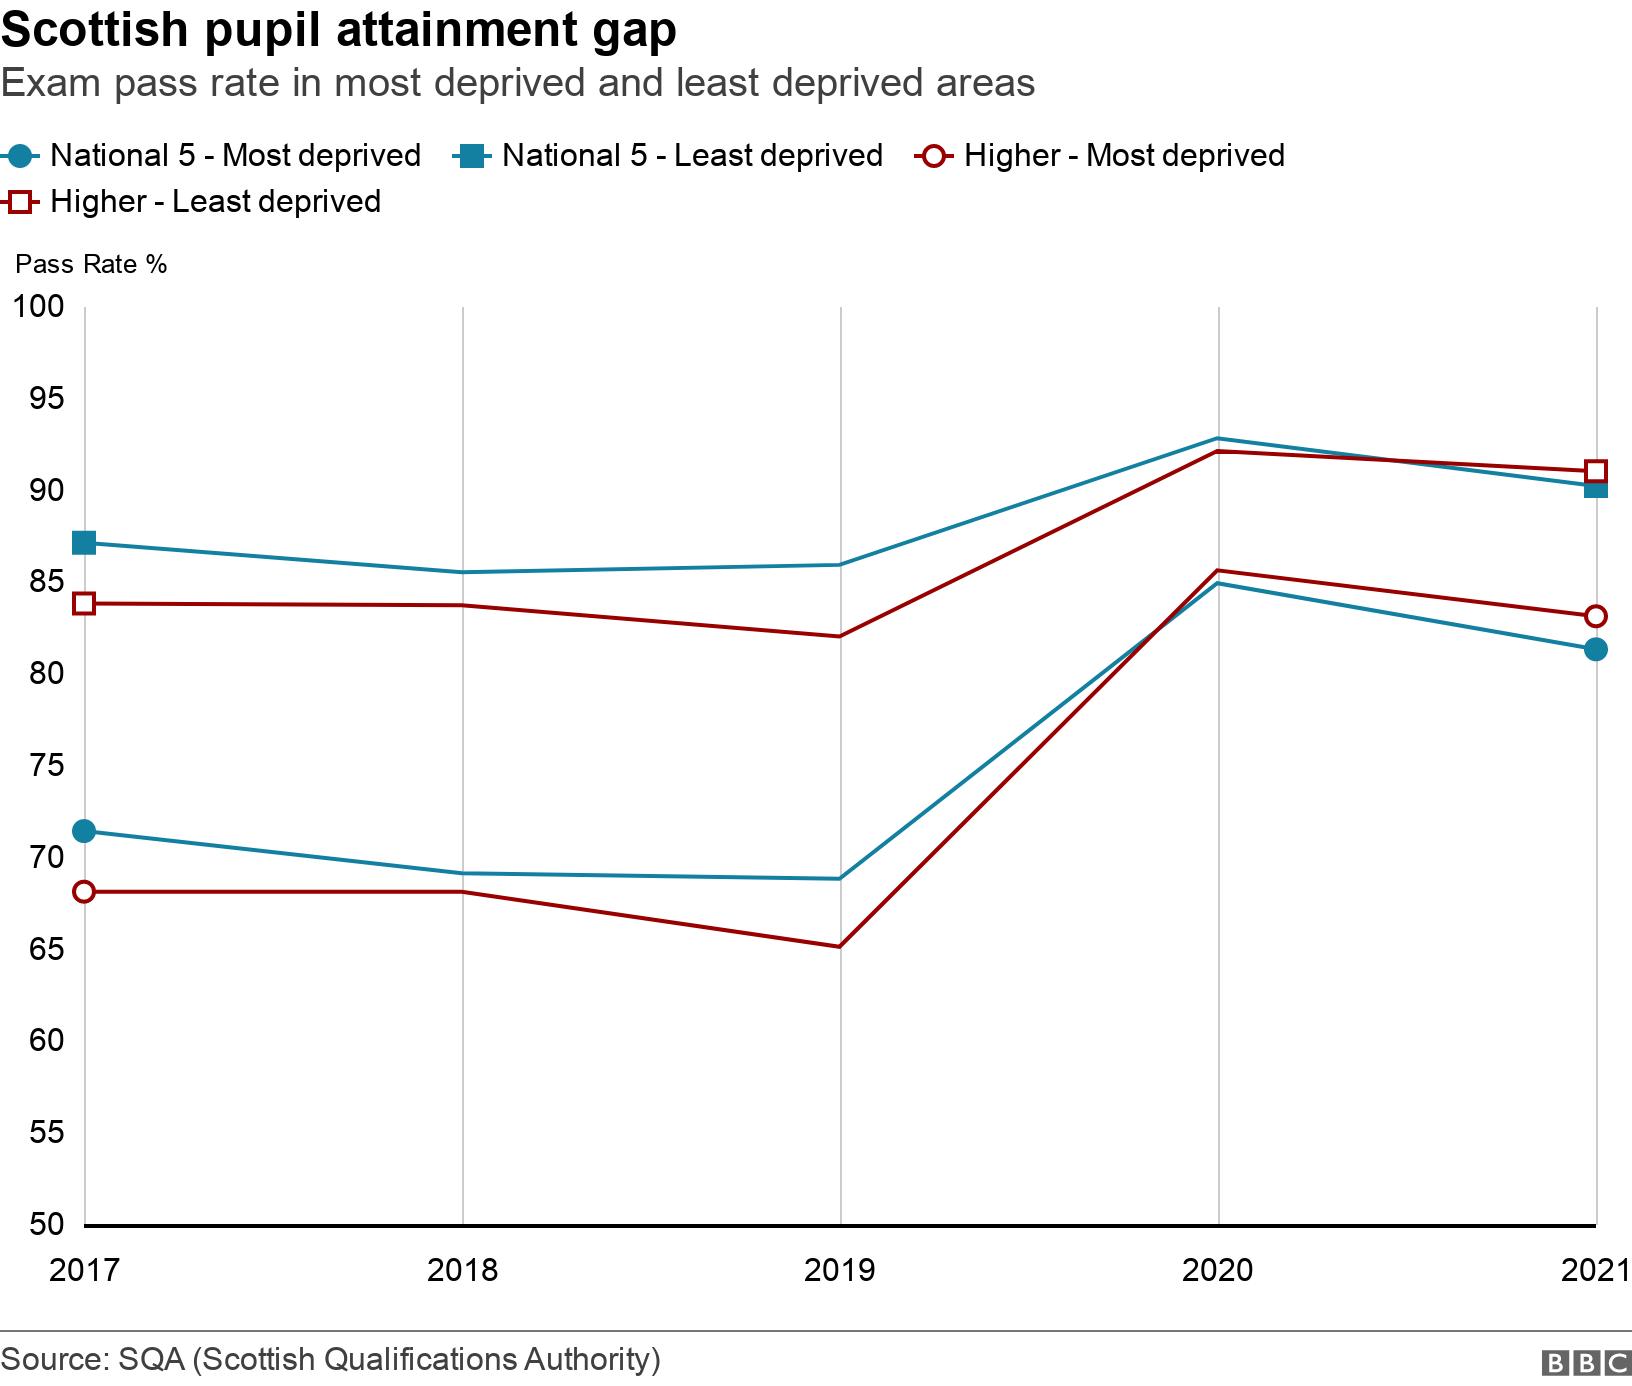 Scottish pupil attainment gap. Exam pass rate in most deprived and least deprived areas.  .